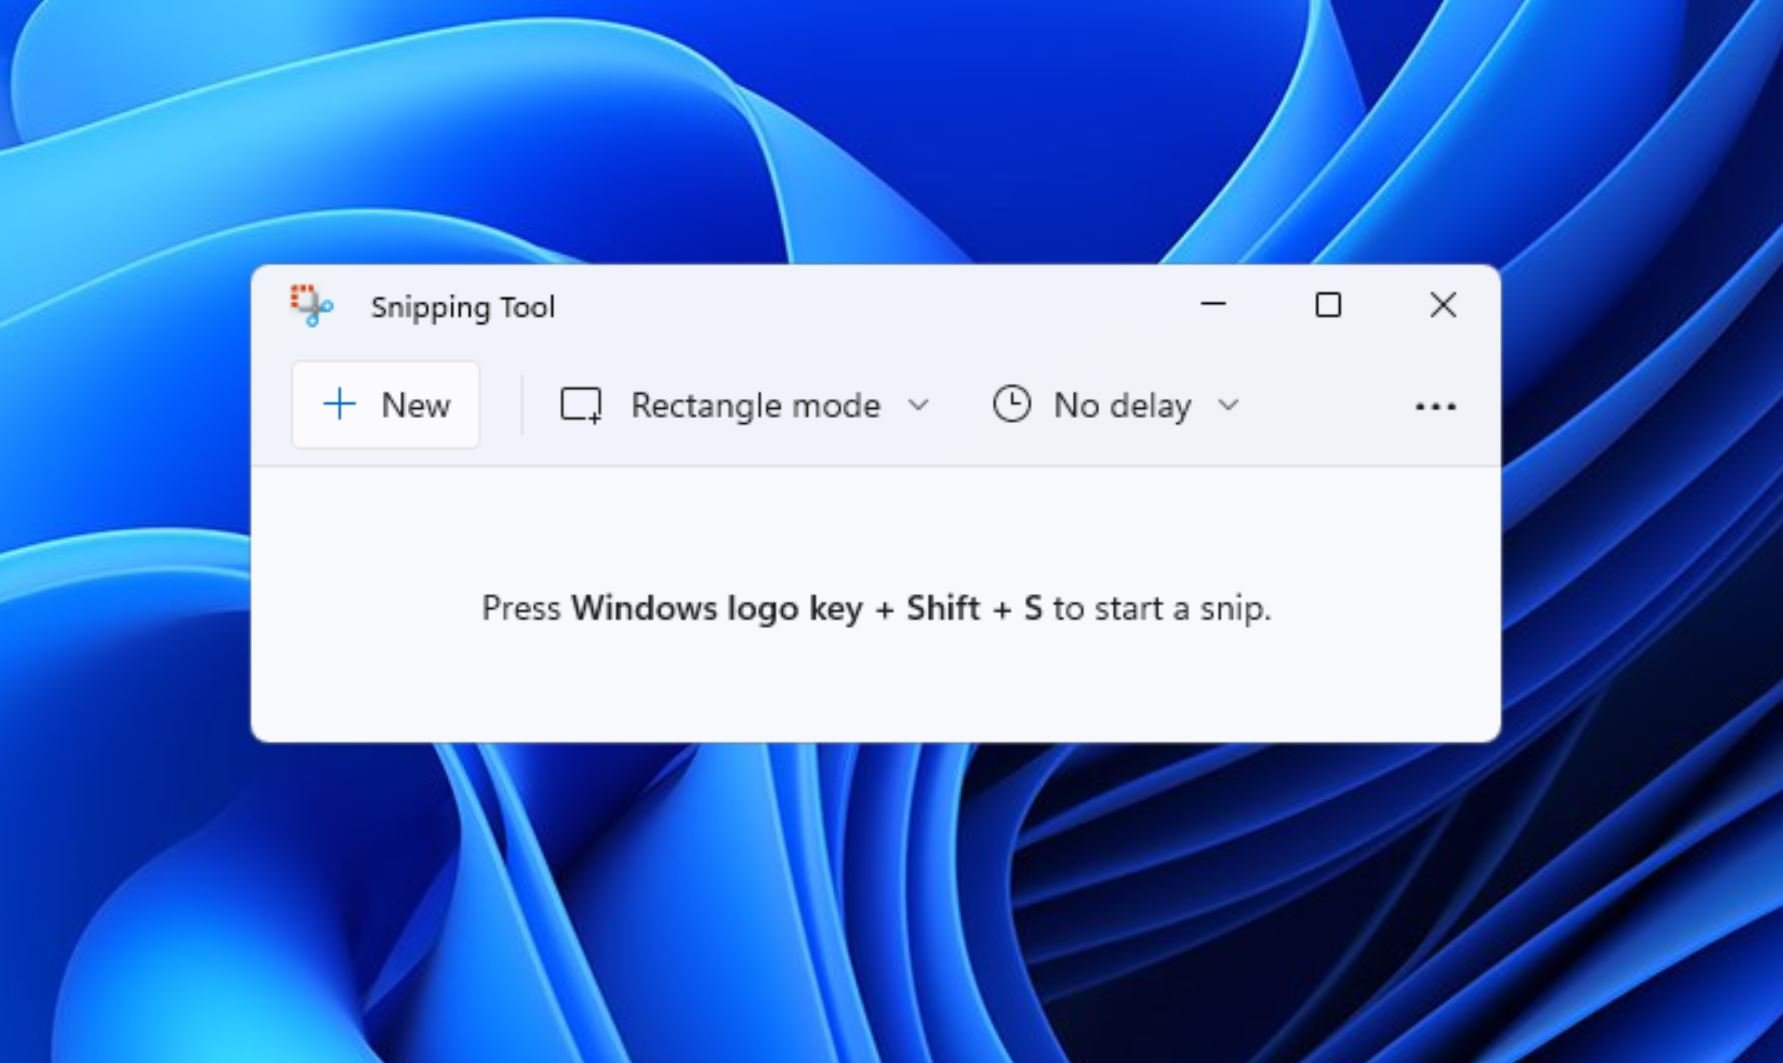 Microsoft releases updated Snipping Tool, Calculator, and Mail and Calendar apps for Windows 11 users